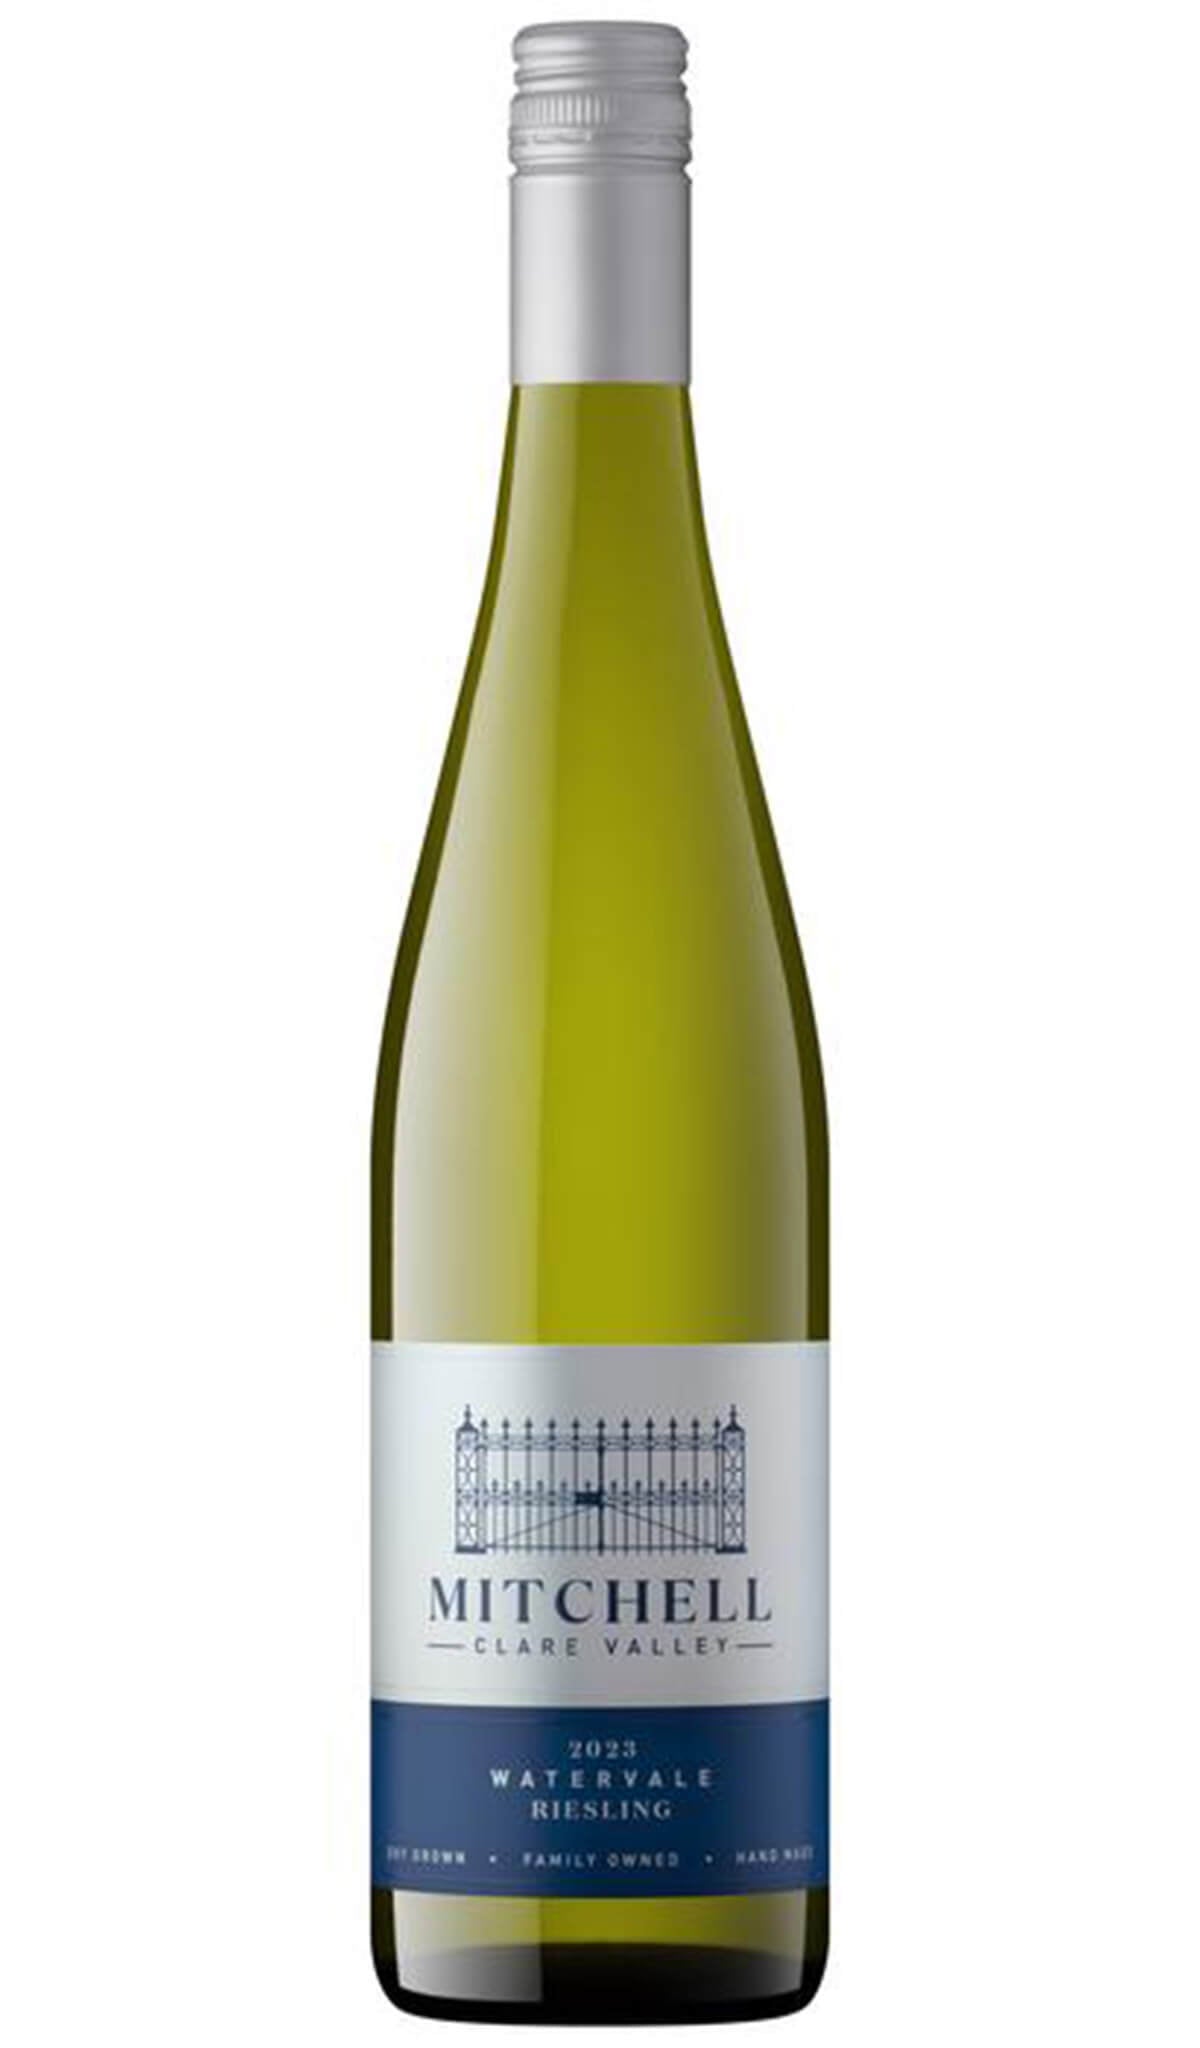 Find out more or buy Mitchell Watervale Riesling 2023 online at Wine Sellers Direct - Australia’s independent liquor specialists.